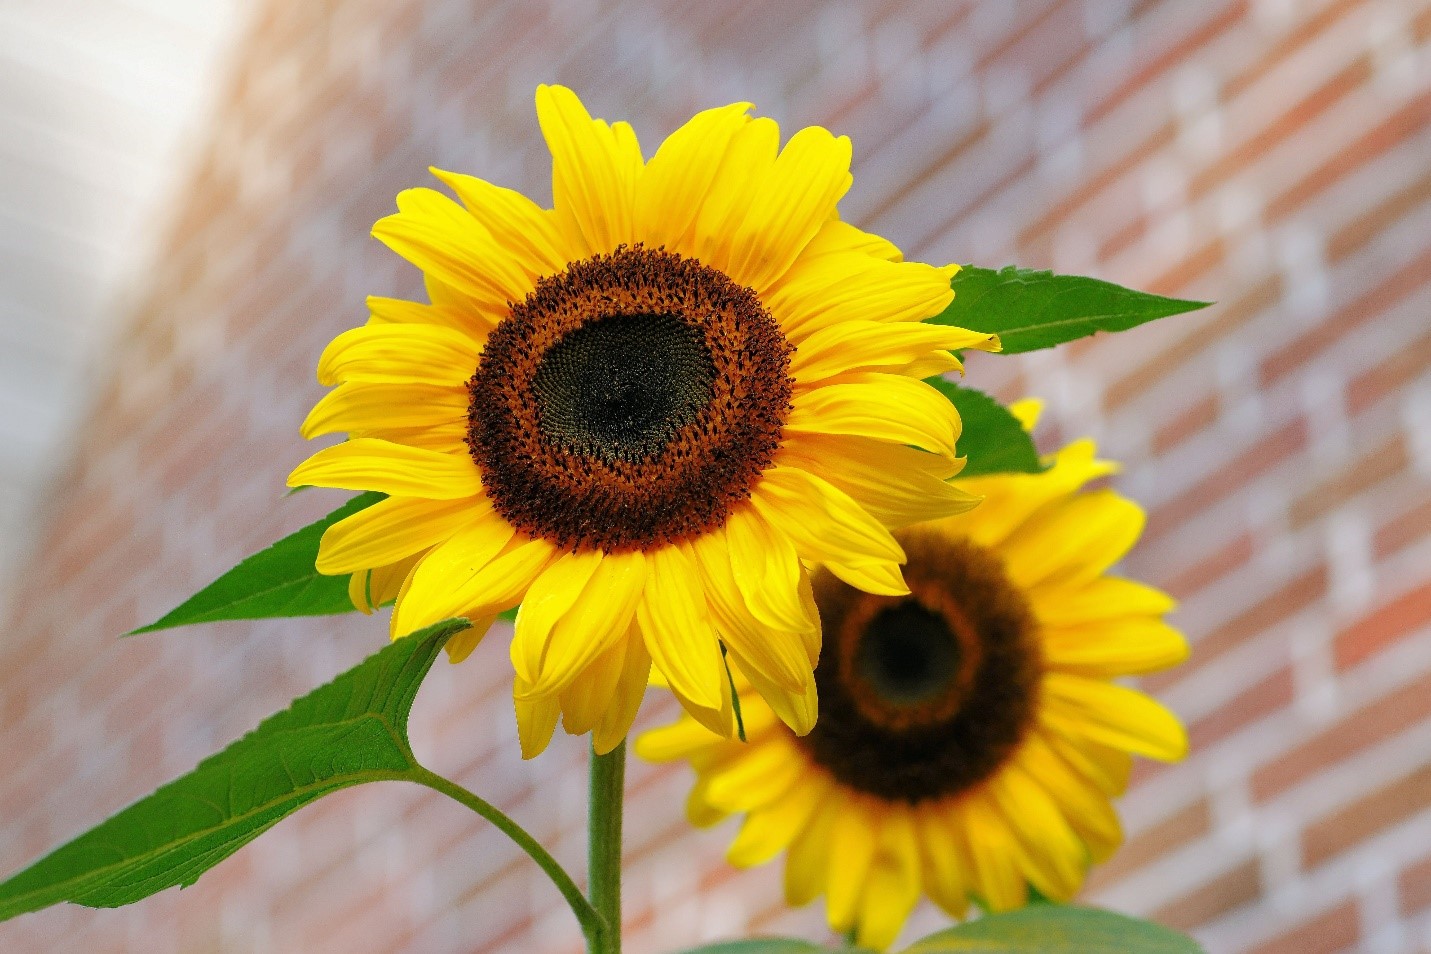 Group of sunflowers